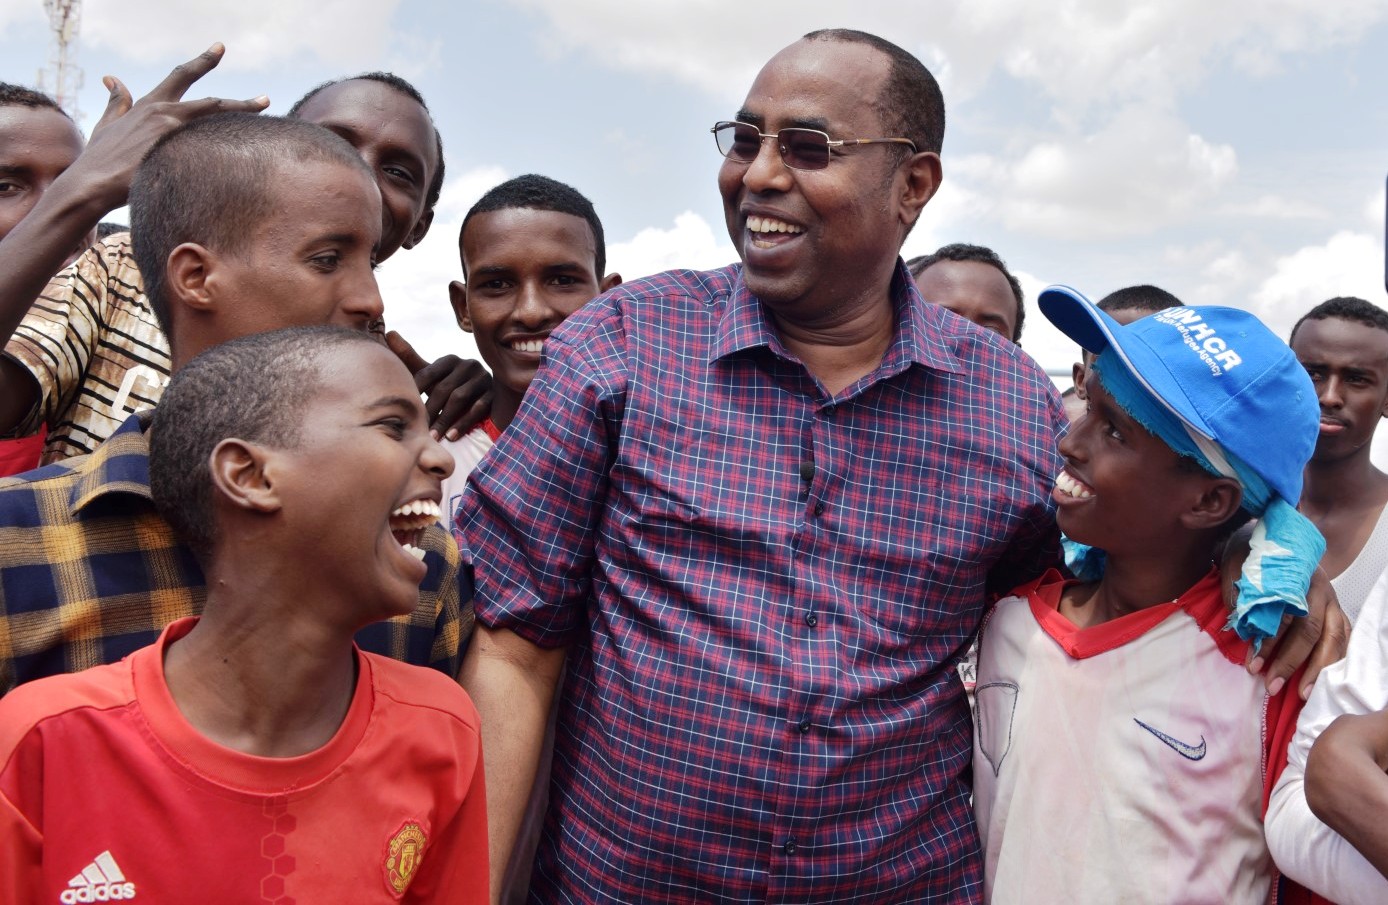 Ambassador Affey chats with refugee children in Ifo camp of Dadaab. © UNHCR/A.Nasrullah